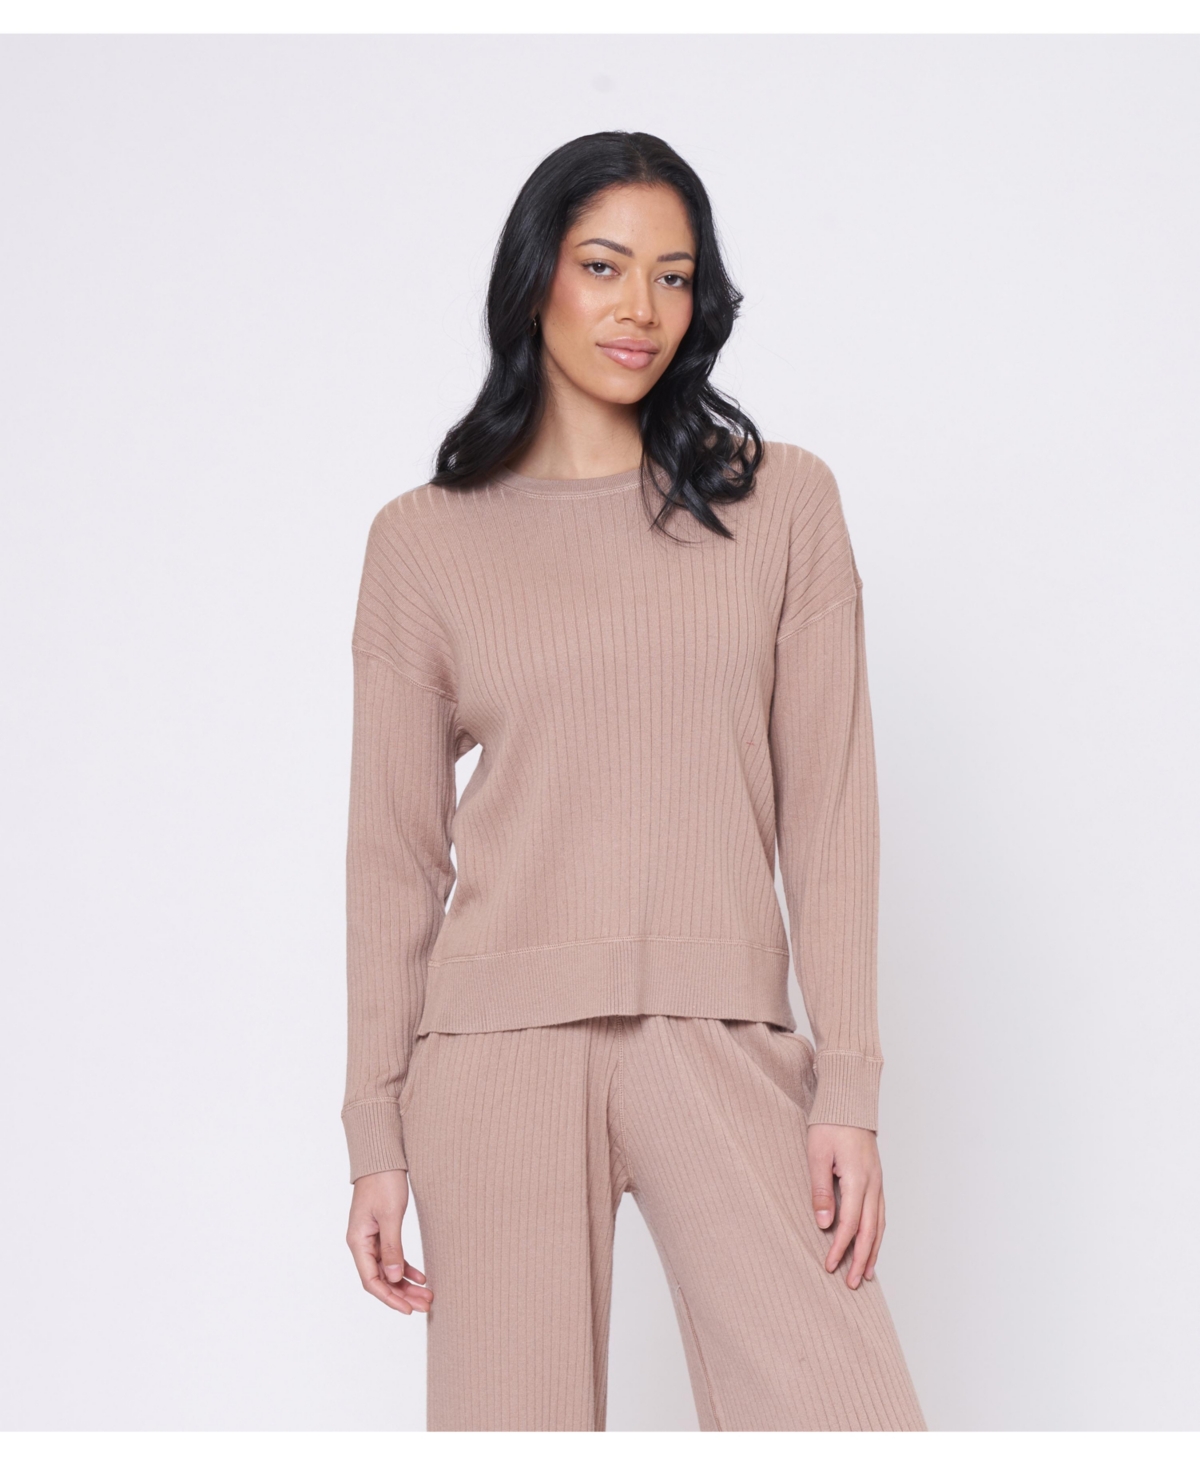 Women's Knit Rosewood Ribbed Crew Top - Lychee